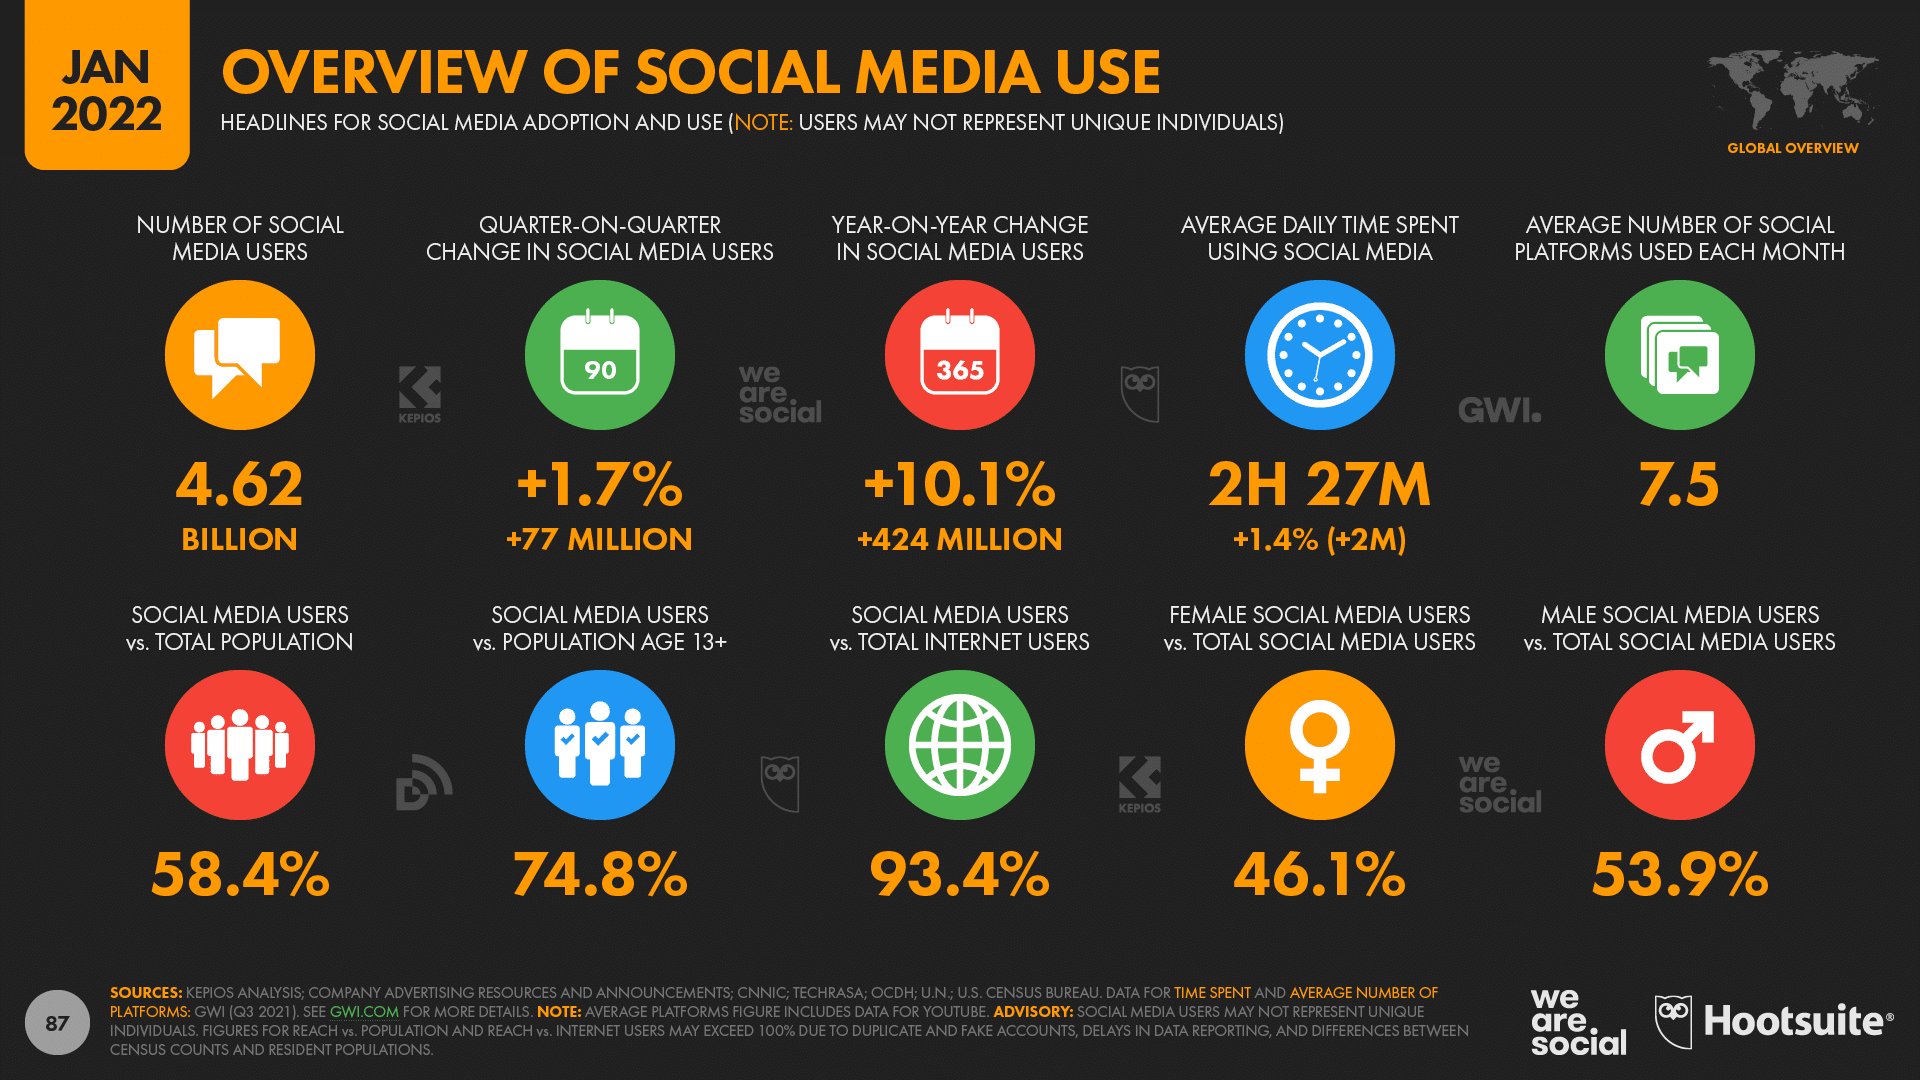 chart showing an overview of social media use